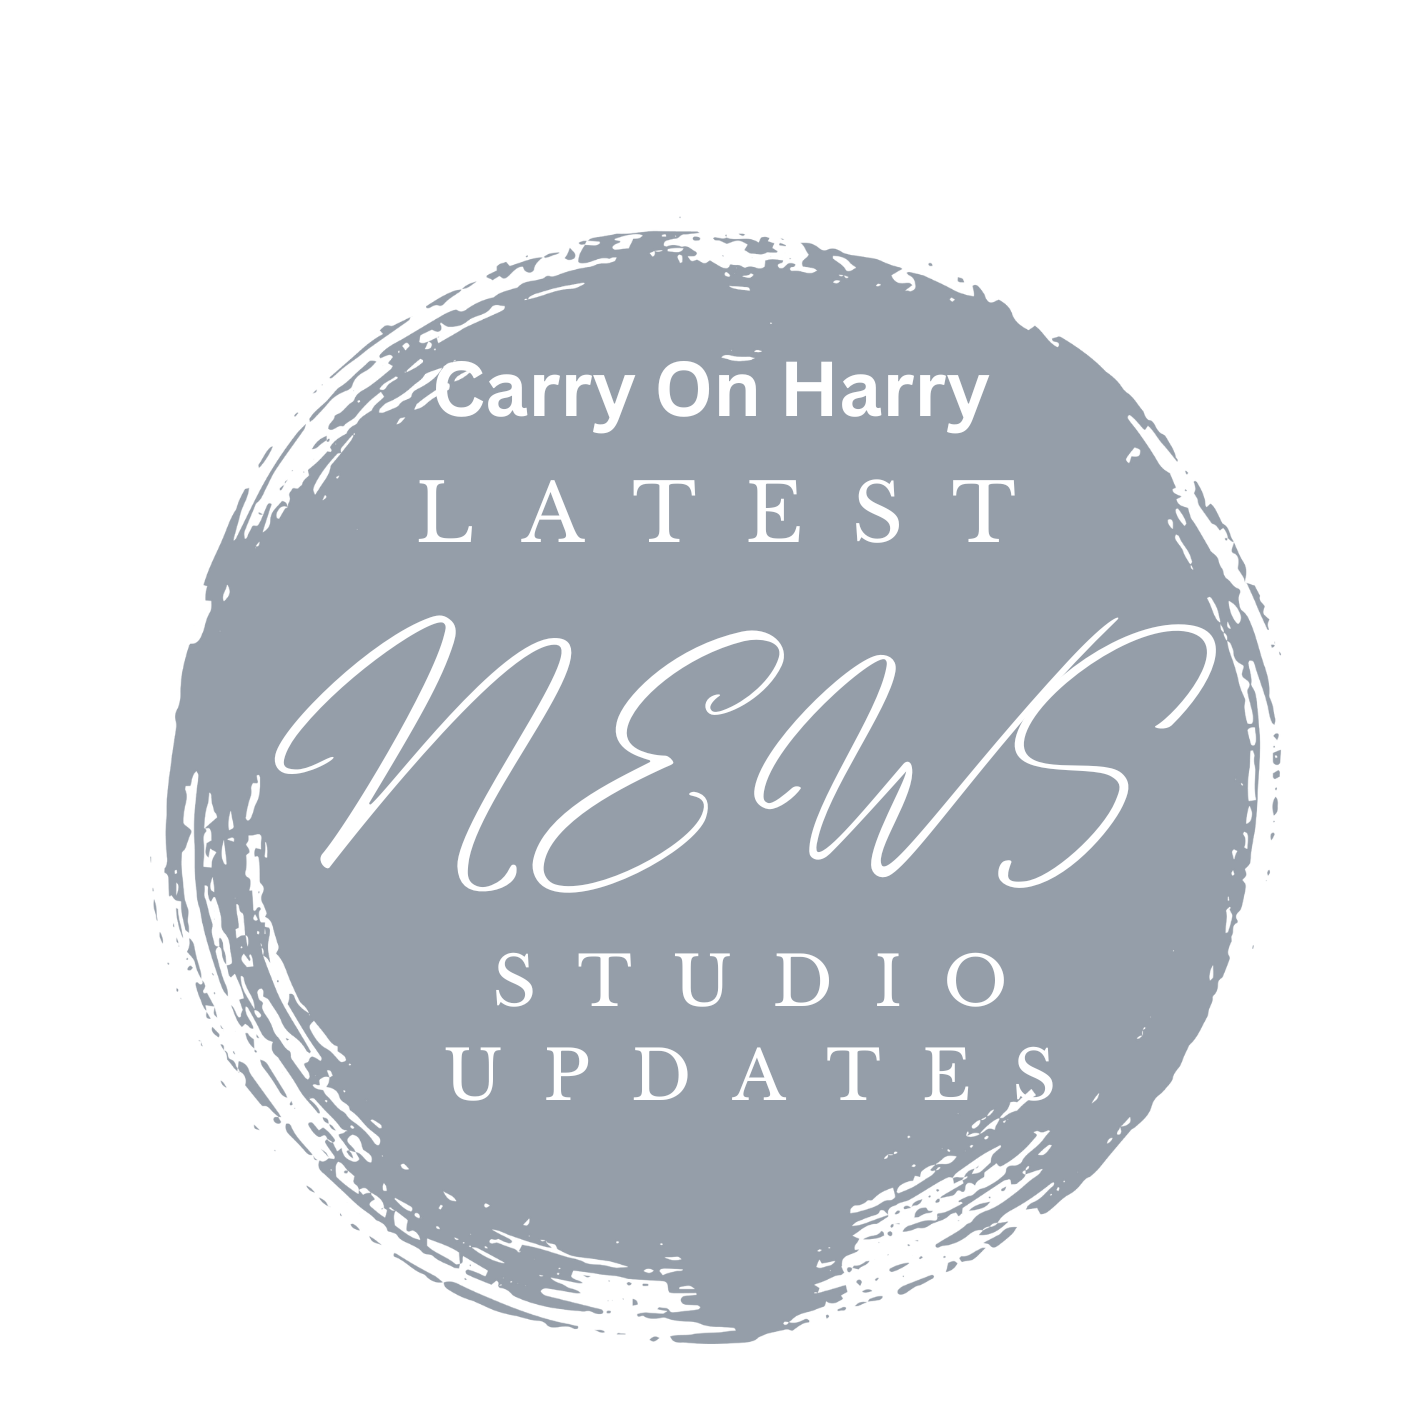 Carry On Harry News Update